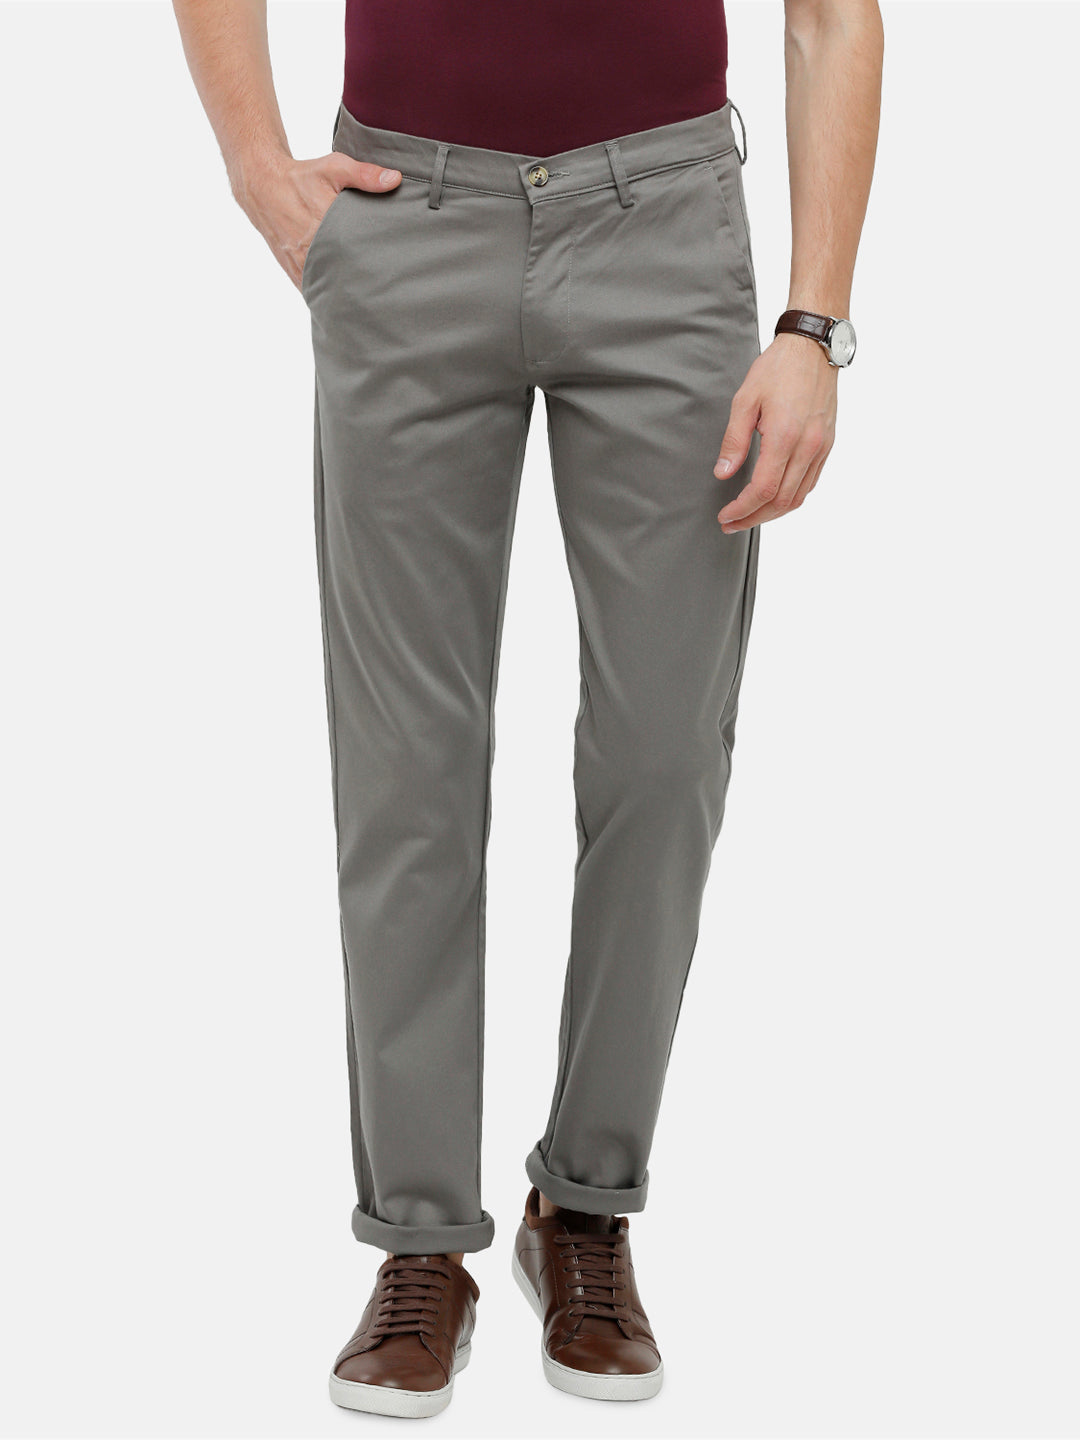 Classic Polo Men's Slim Fit Grey High Density Satin Streatch Trousers - Spectra-Grey